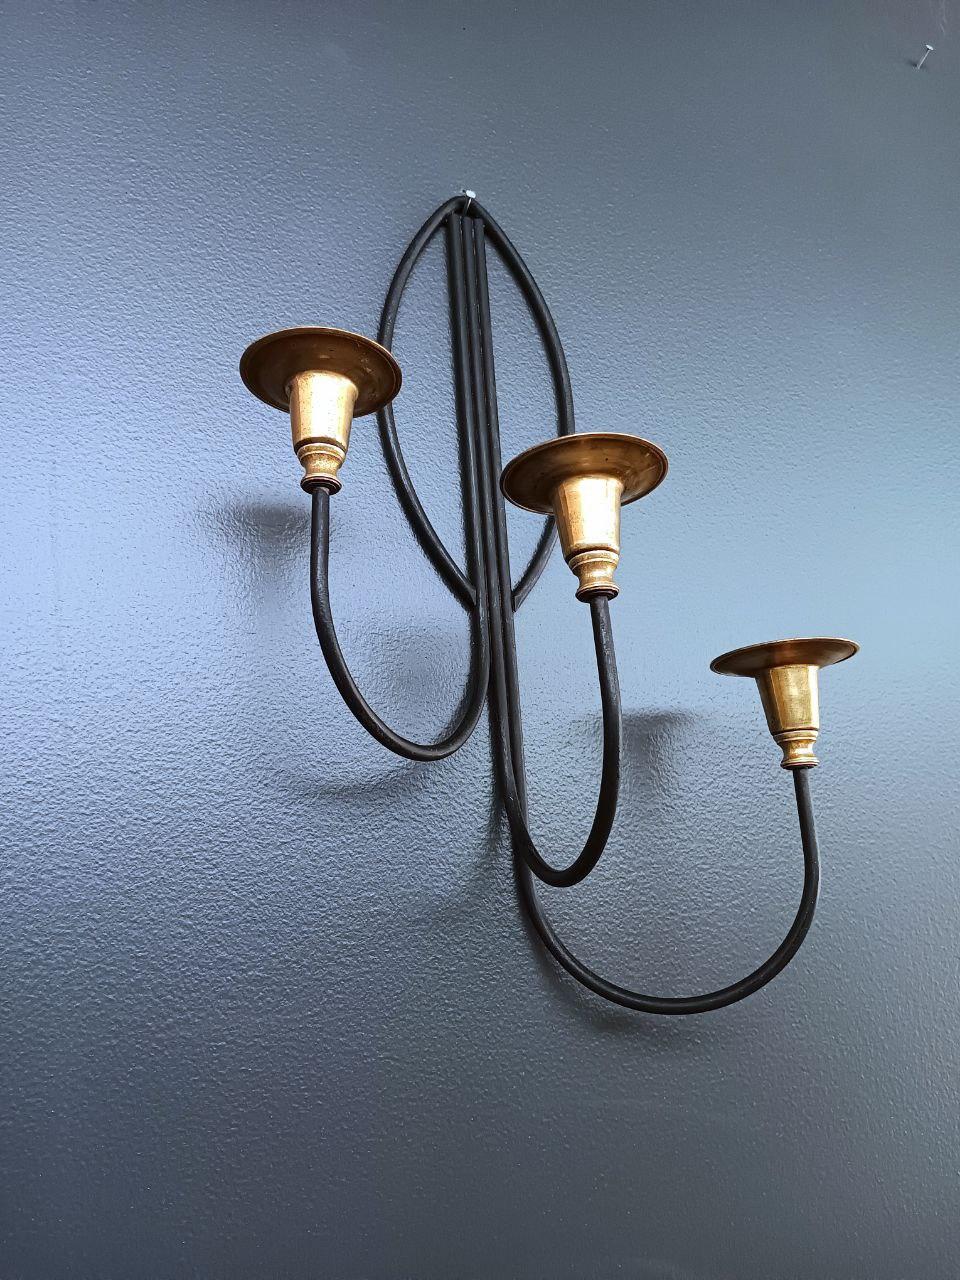 Pair of Mid-Century Modern Iron & Brass Candle Wall Sconces For Sale 2